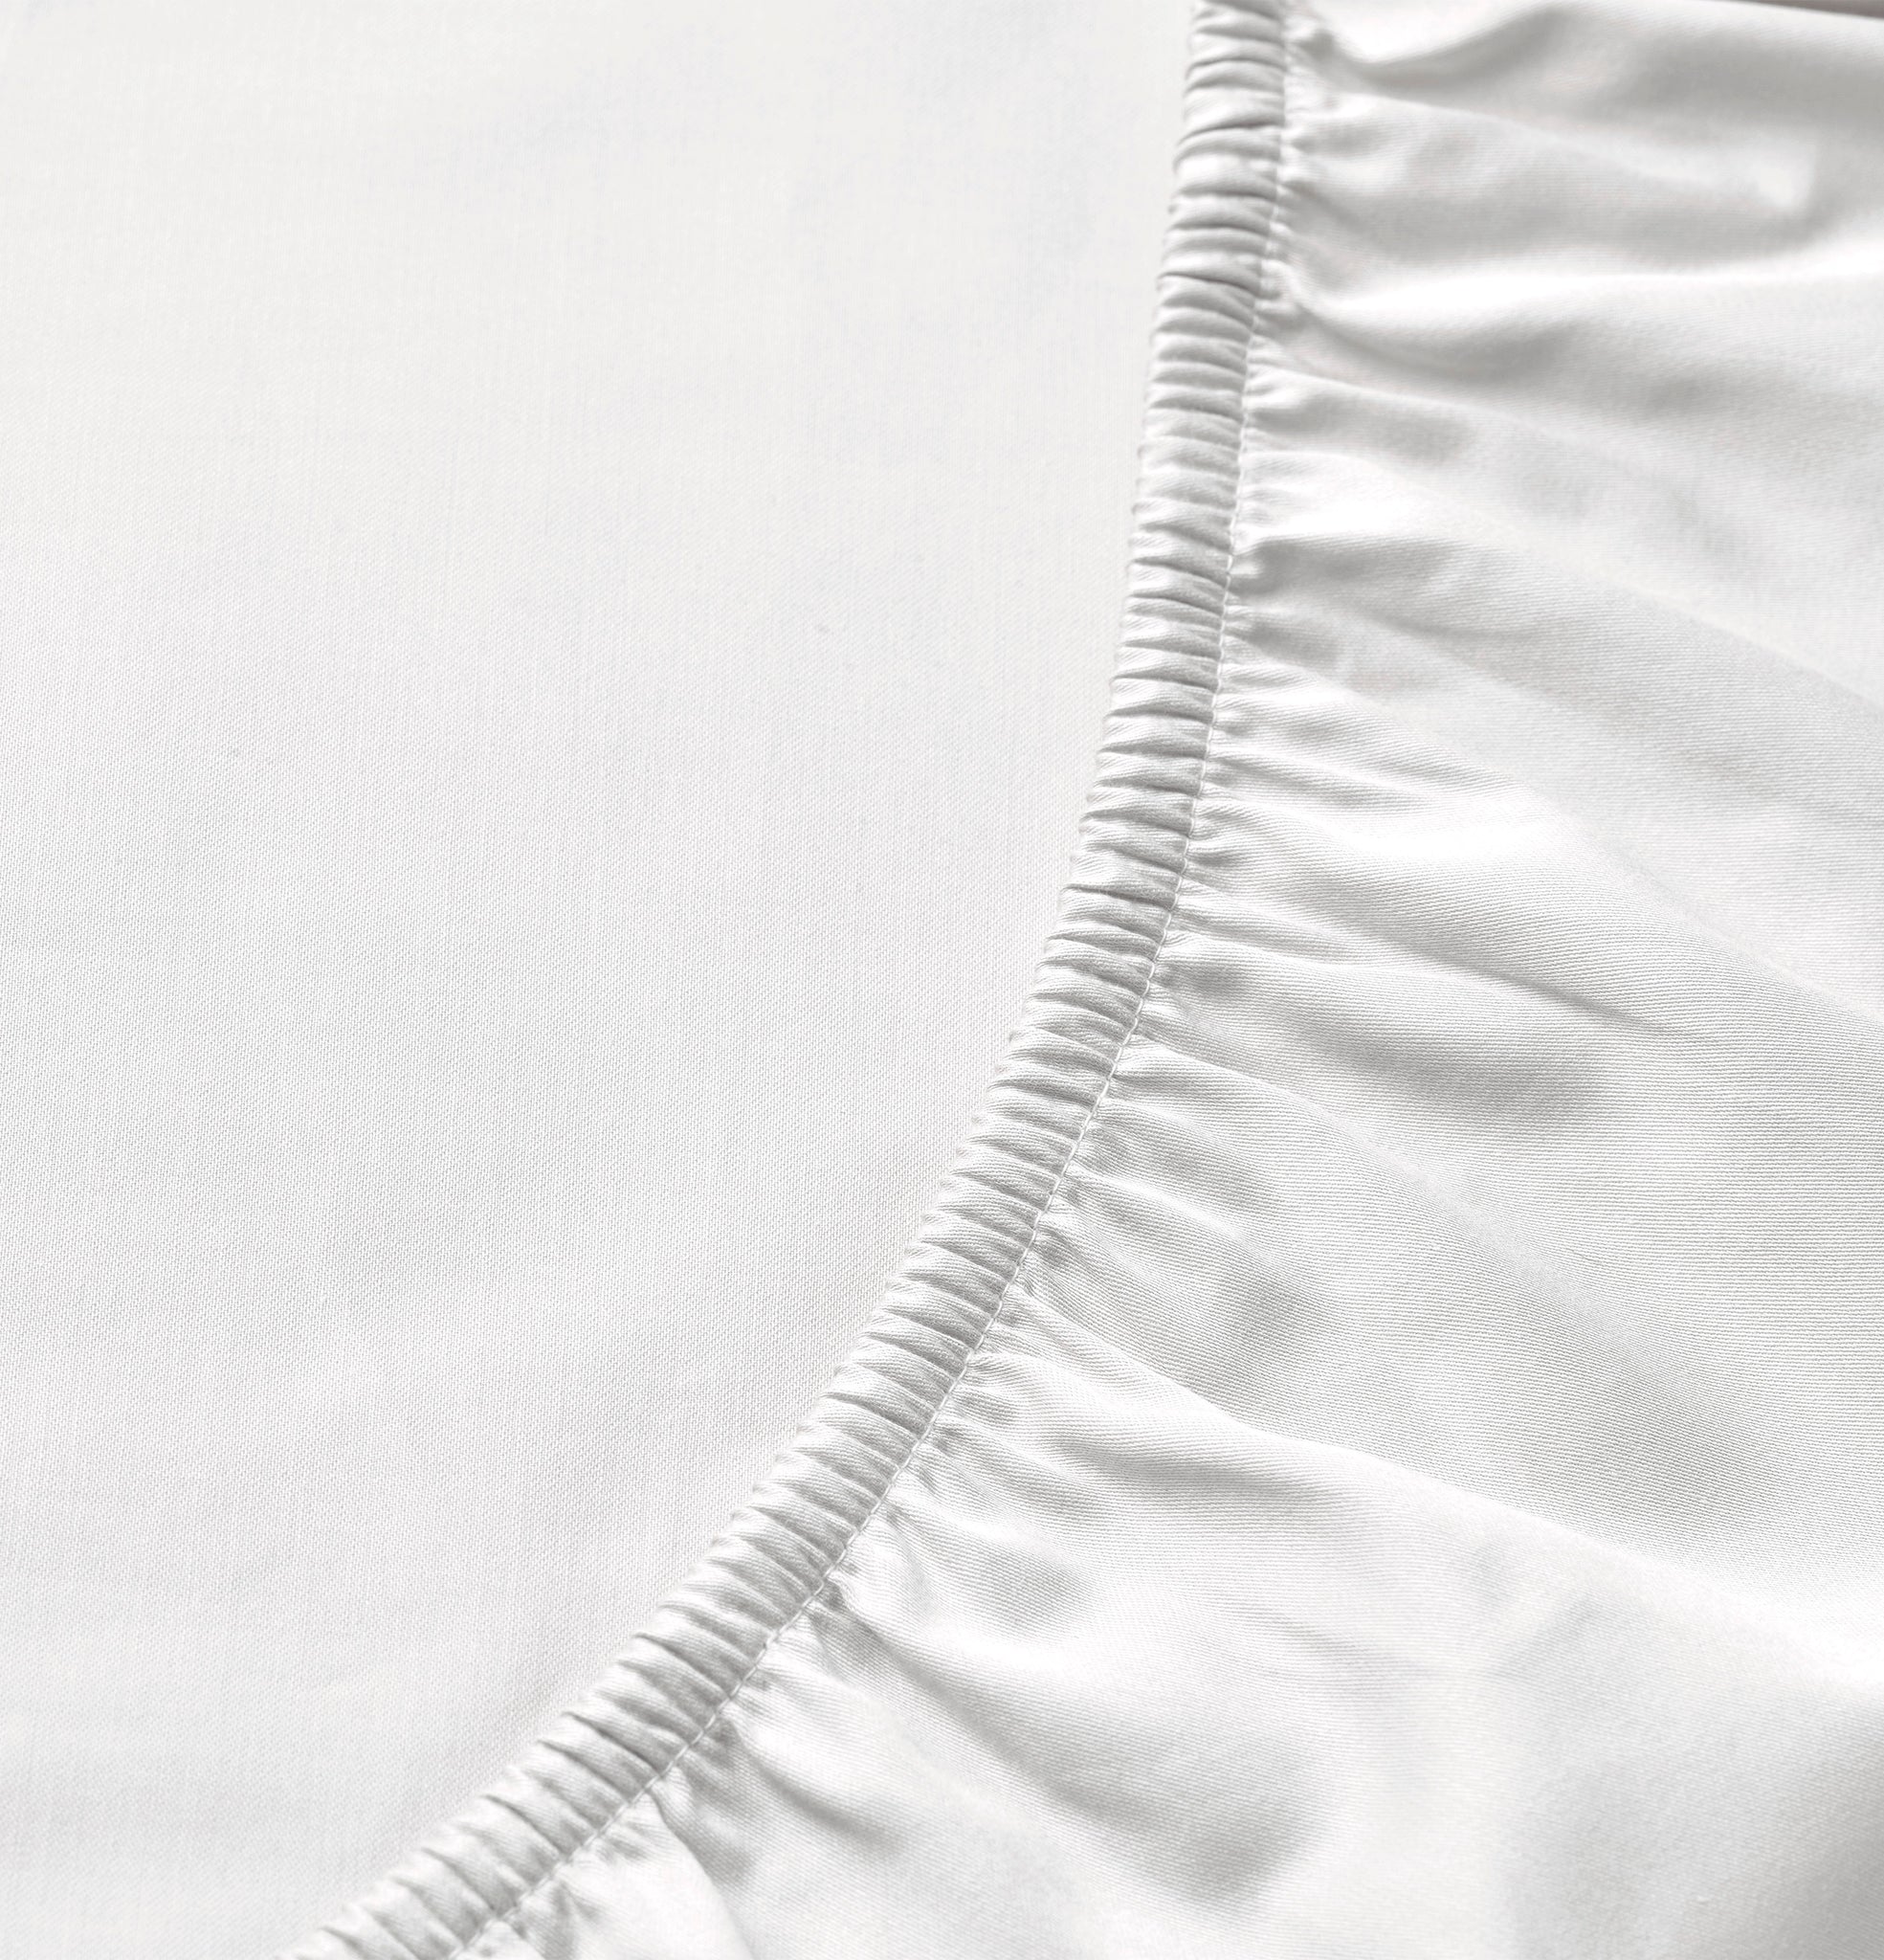 Sateen Organic Cotton Fitted Sheet - Midwinter White